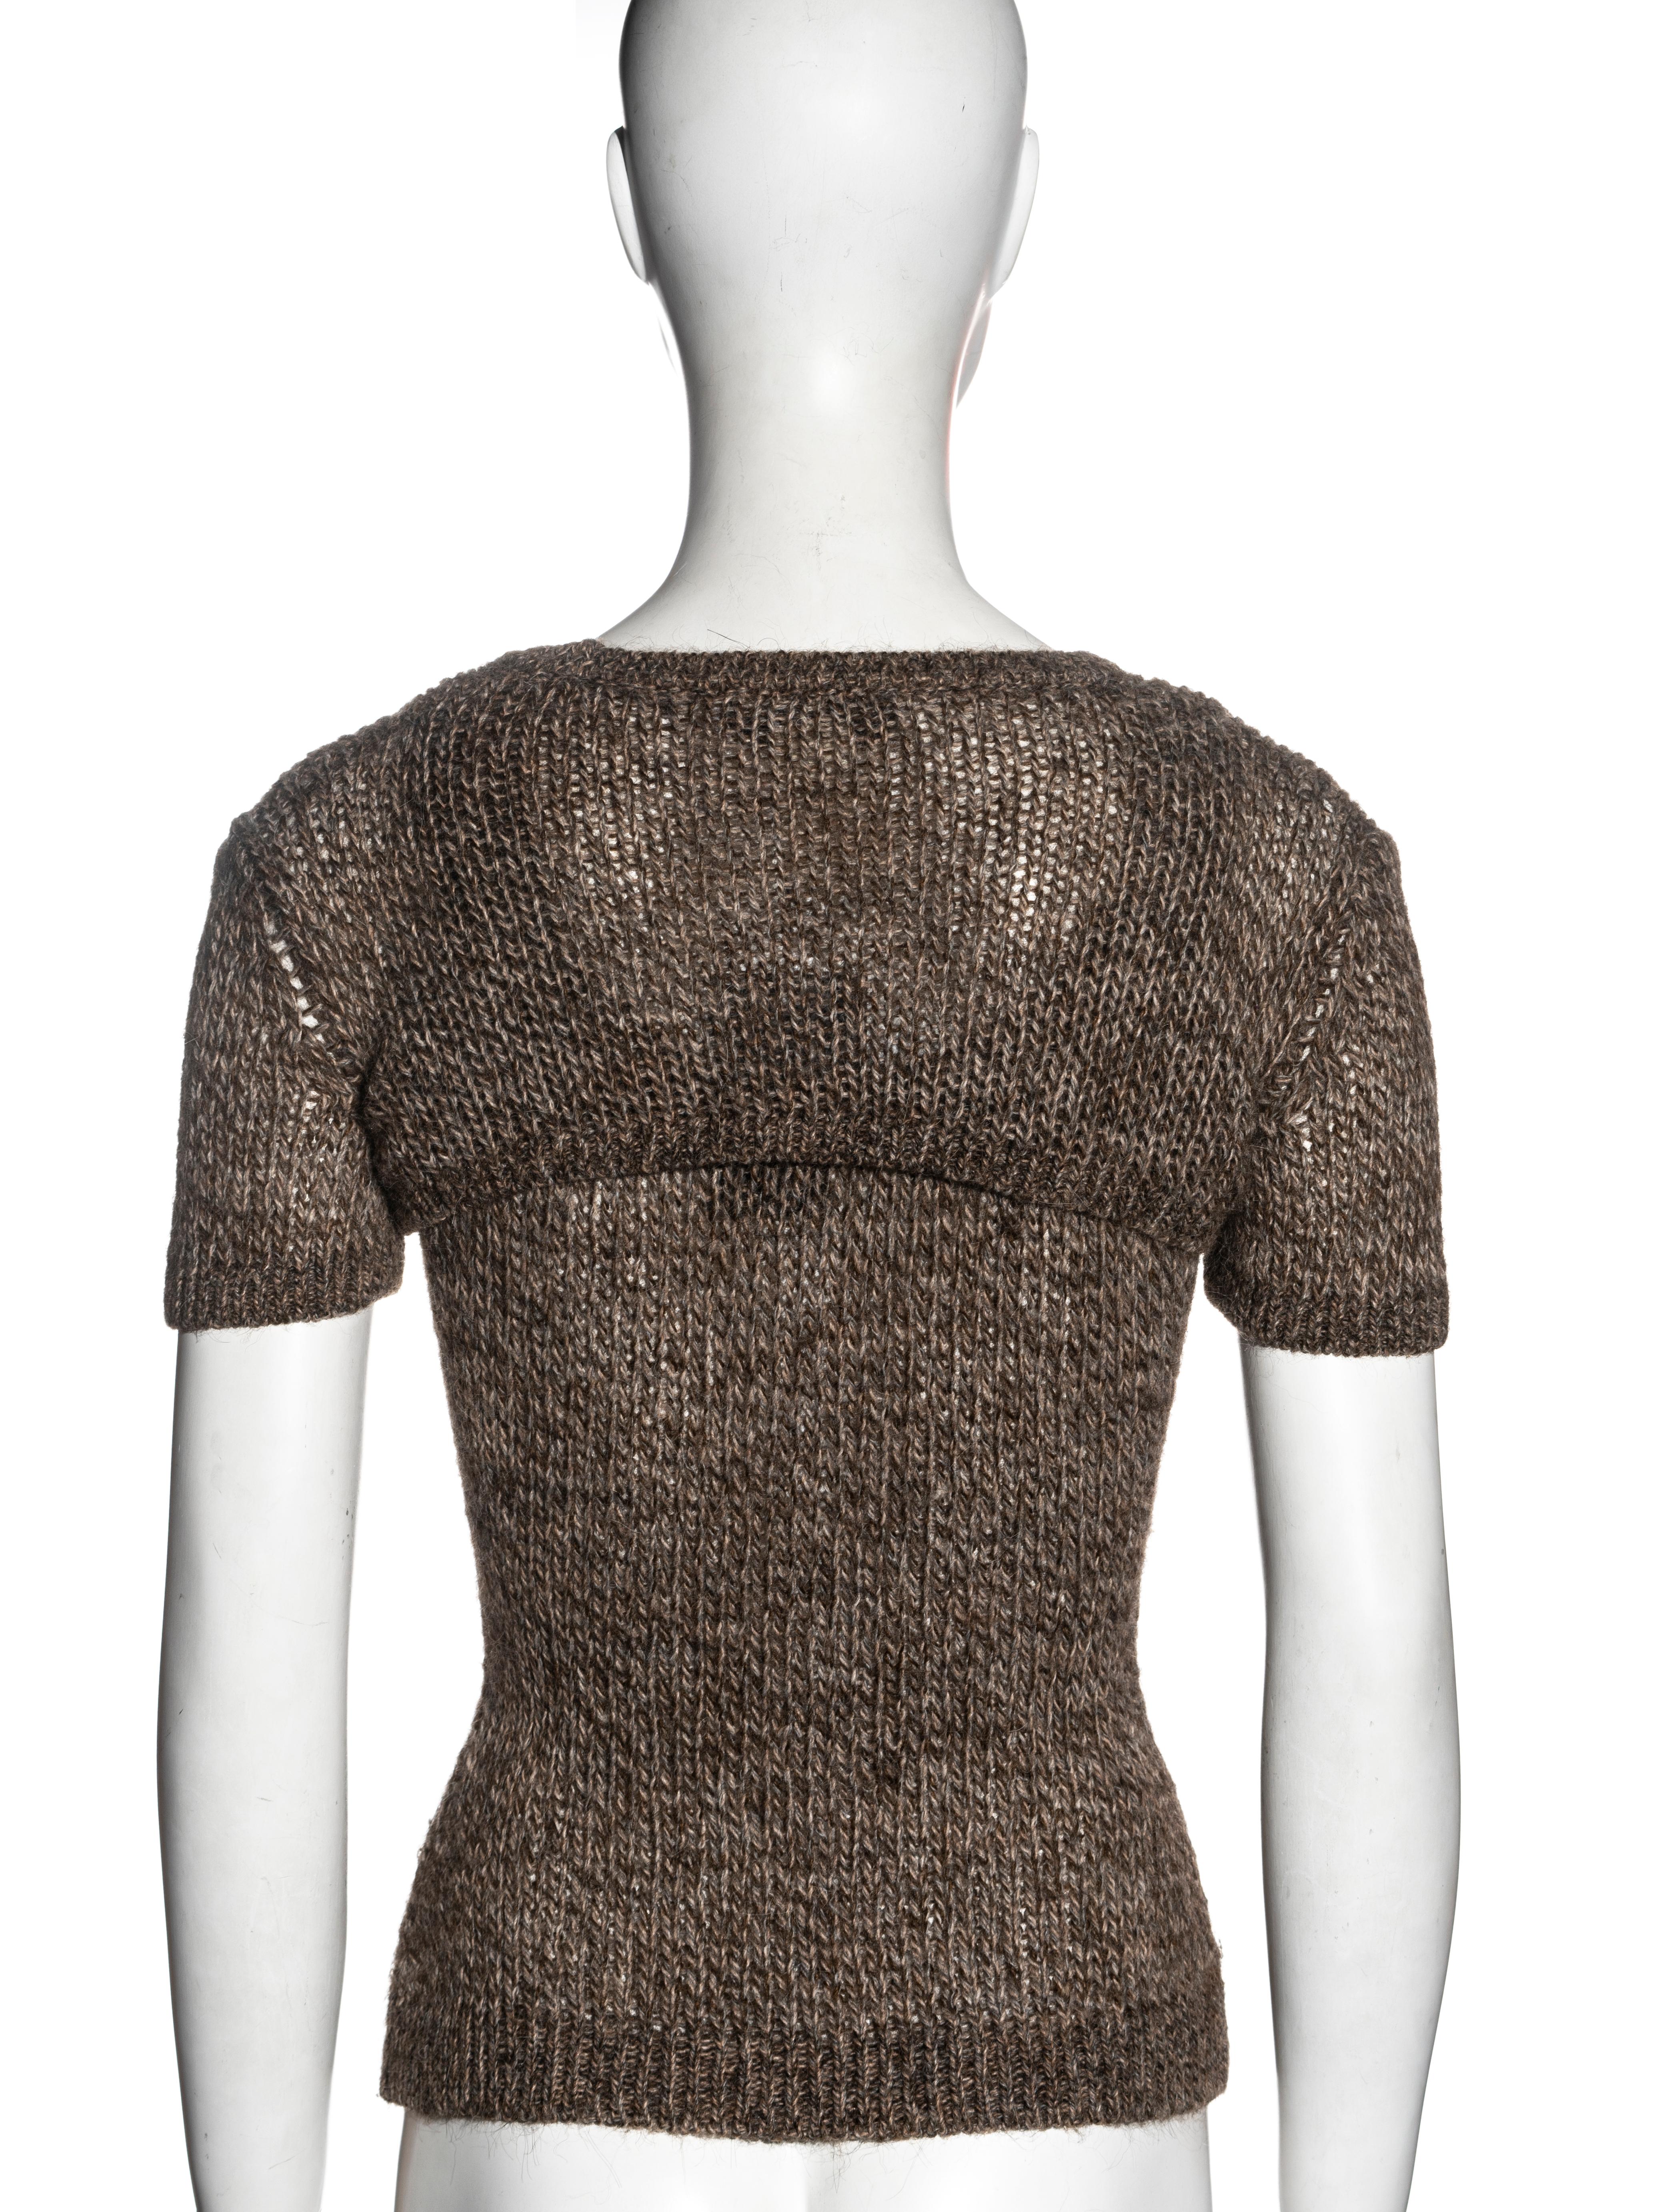 Dolce & Gabbana brown knitted tank and crop top set, ss 1999 For Sale 3